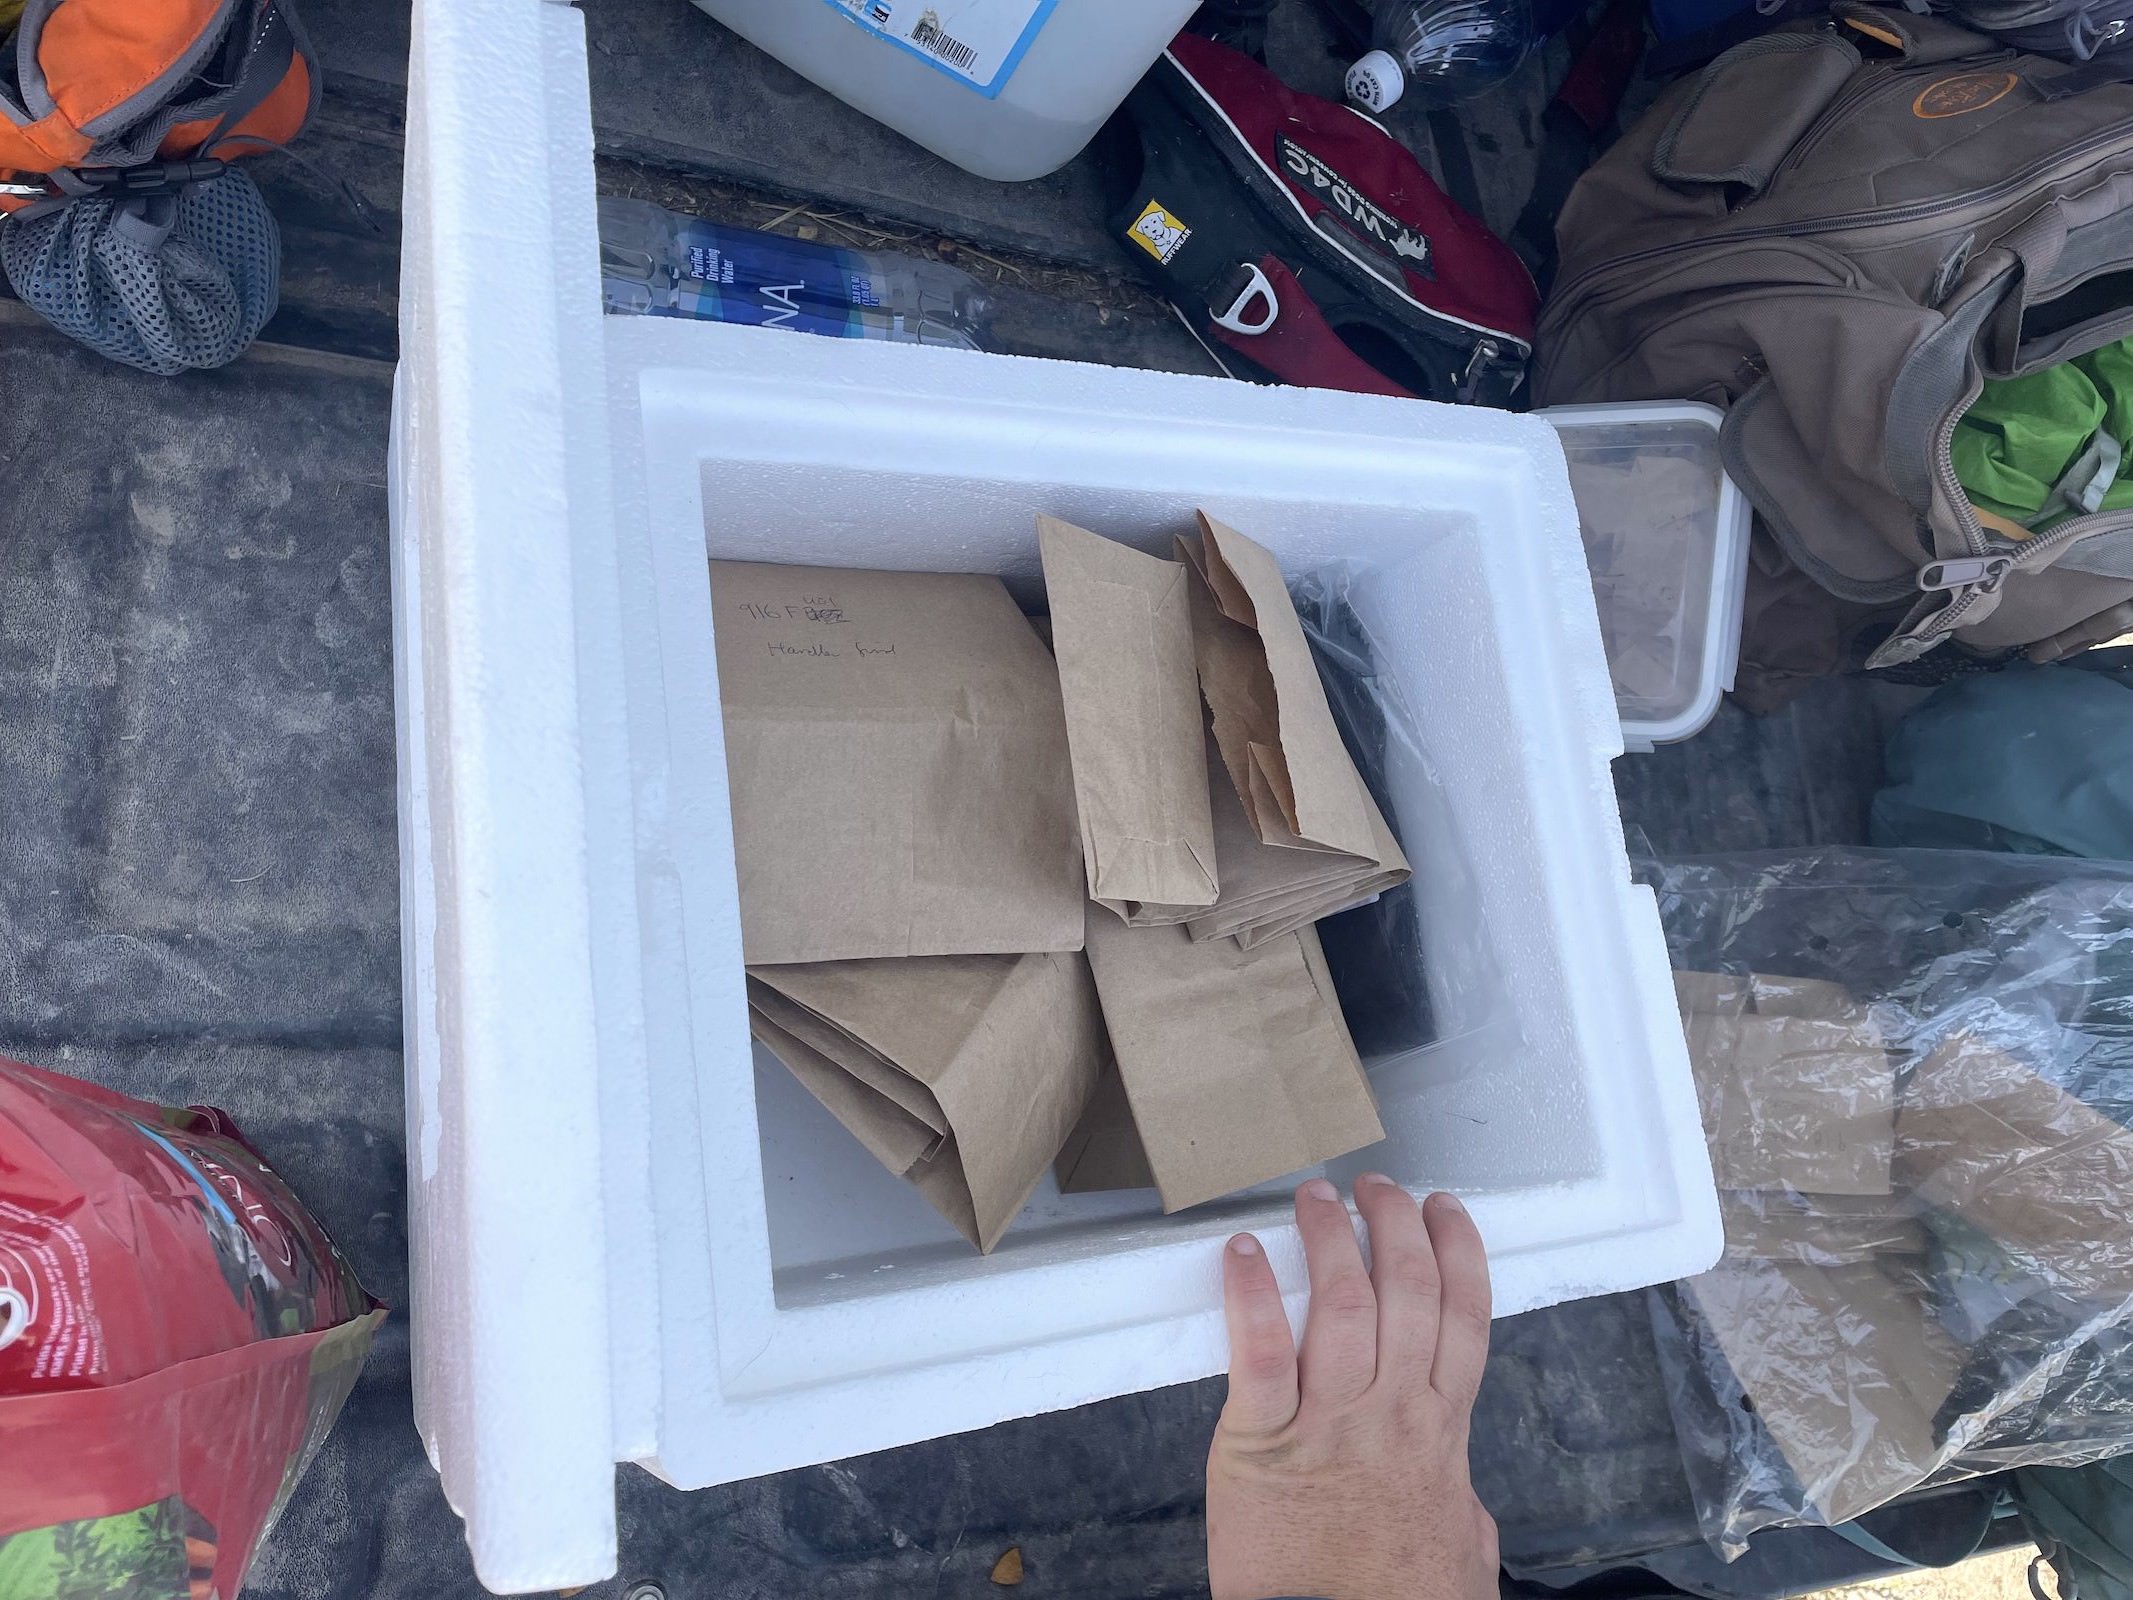 a white box full of brown bags sits near a pile of dog supplies. A hand rests on the cooler